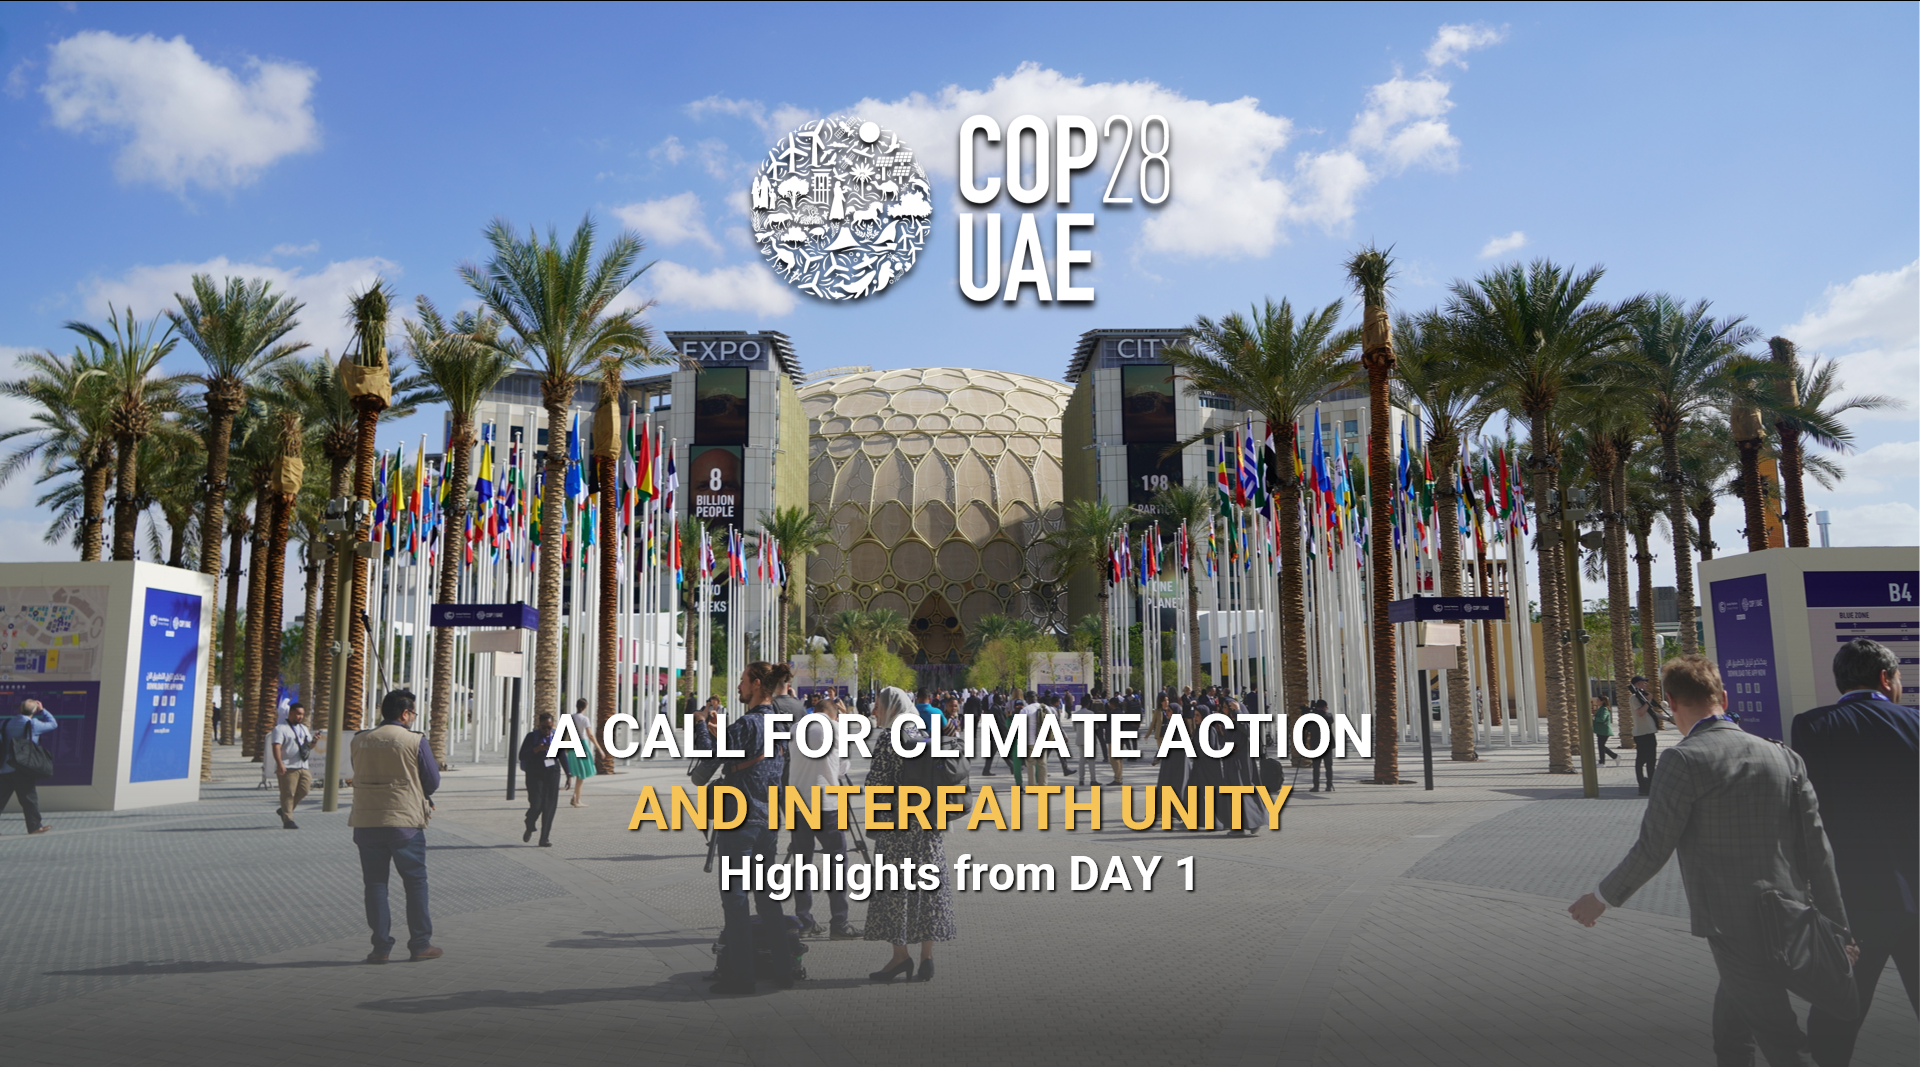 Day 1 at COP 28: A Call for Climate Action and Interfaith Unity in Dubai